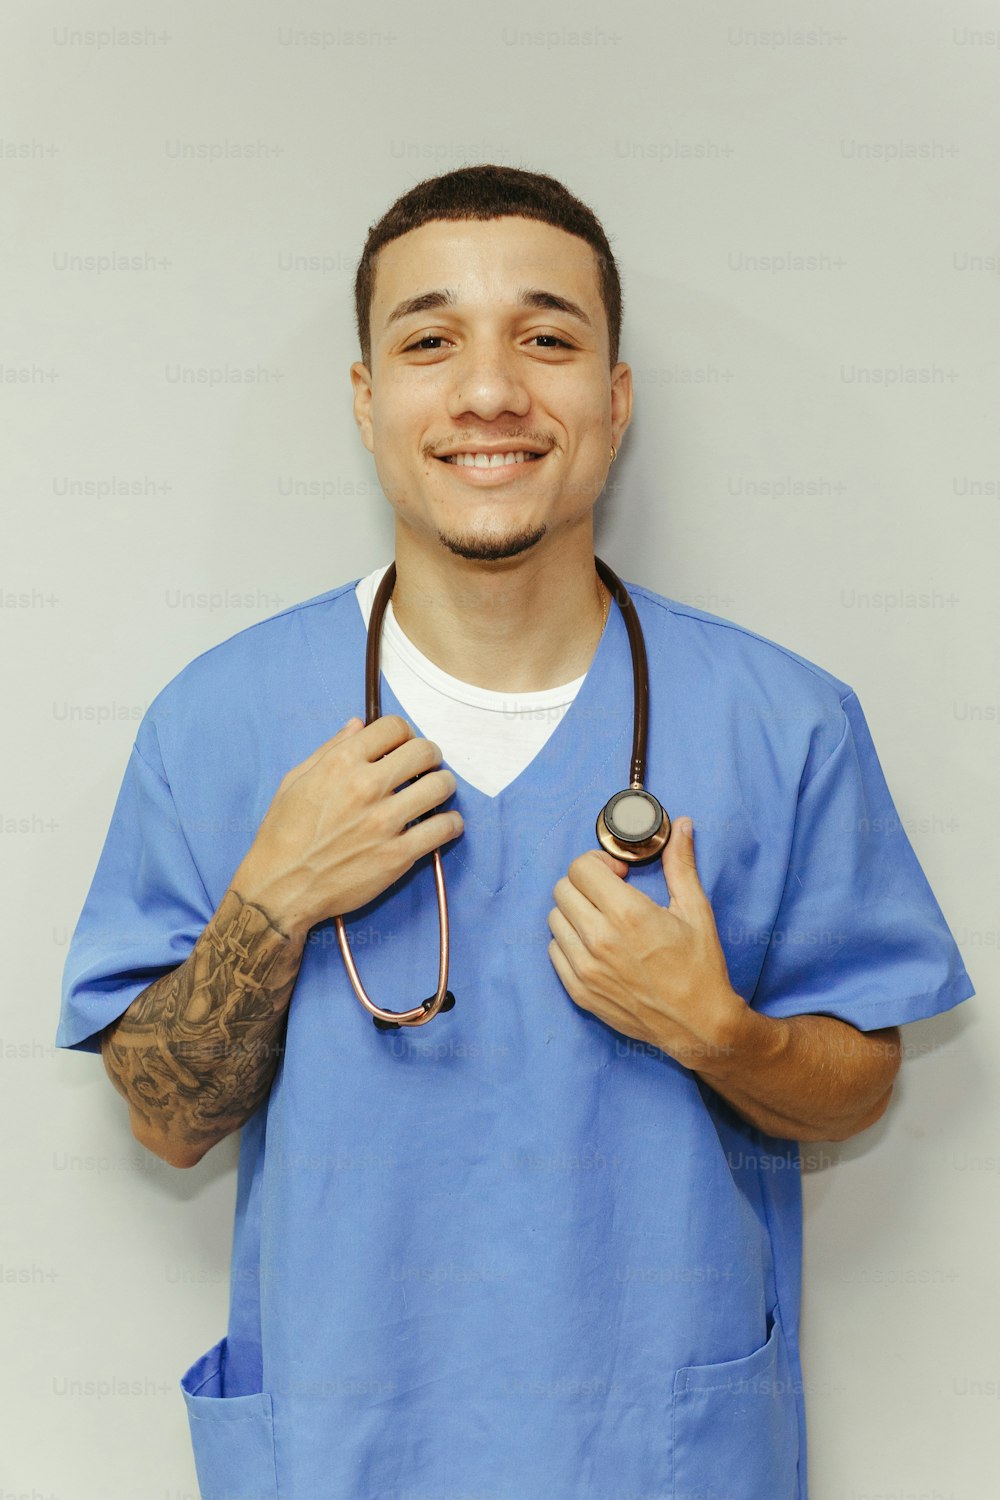 a man in a blue scrub suit holding a stethoscope